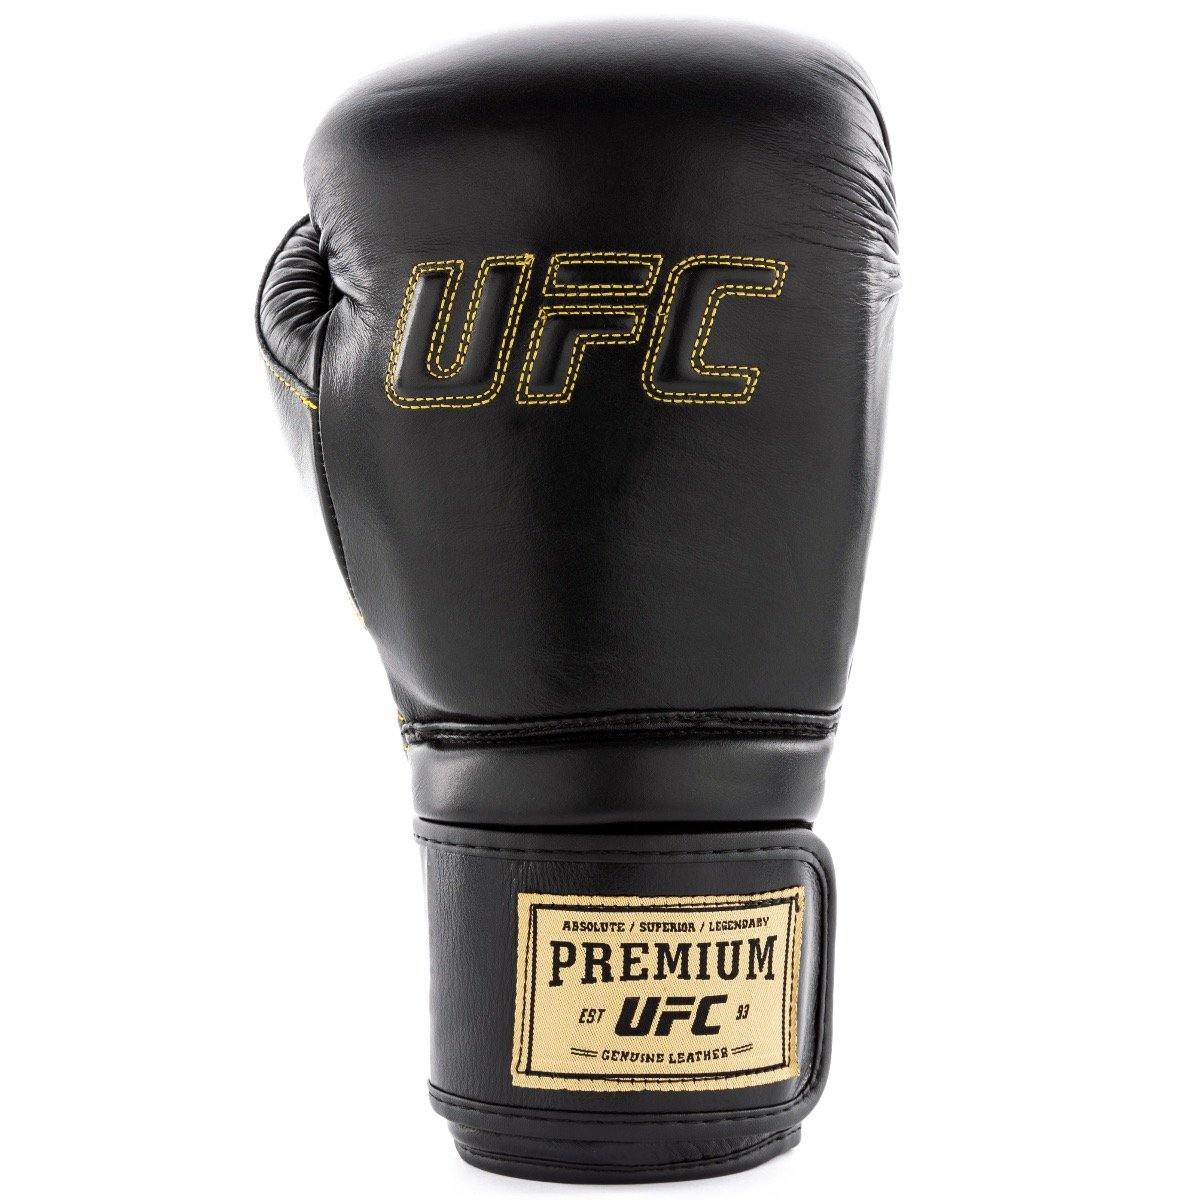 Pack 2x Pares Guantes Mma Profesionales Ufc Box Kick Boxing - SD MED